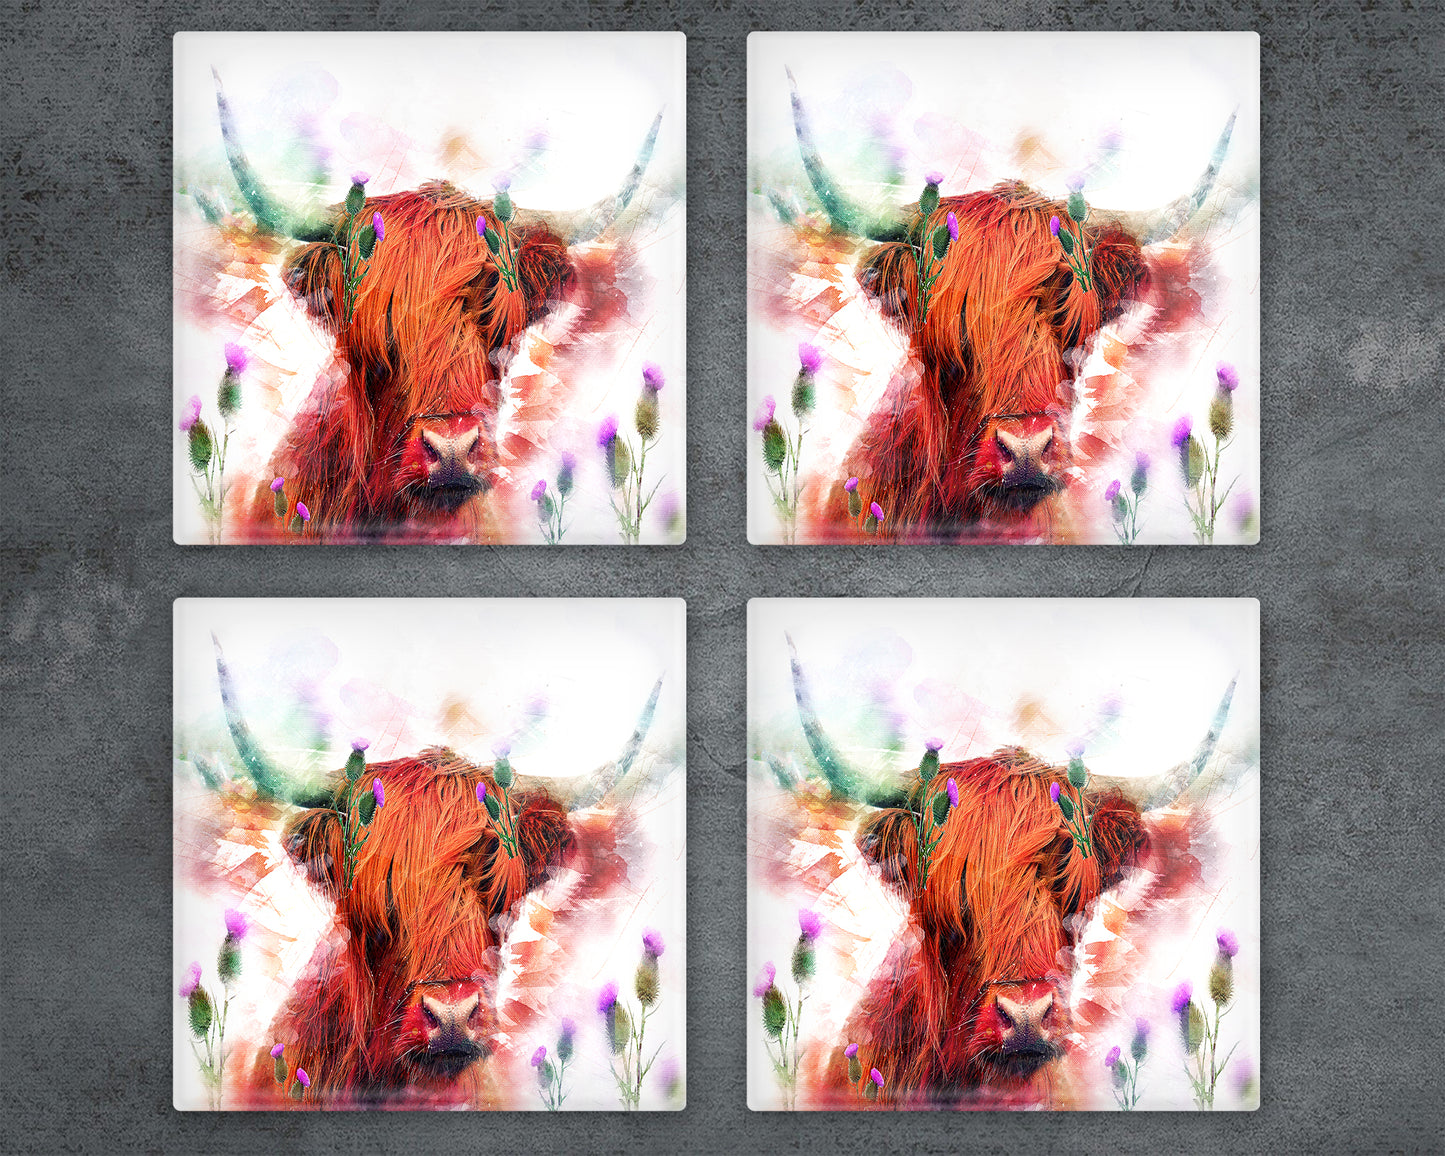 Highland Cow and Thistles Glass  Coaster, Drinks Holder, Colourful Coo's, Scotland, Scottish Gift, Highland Cow Gift